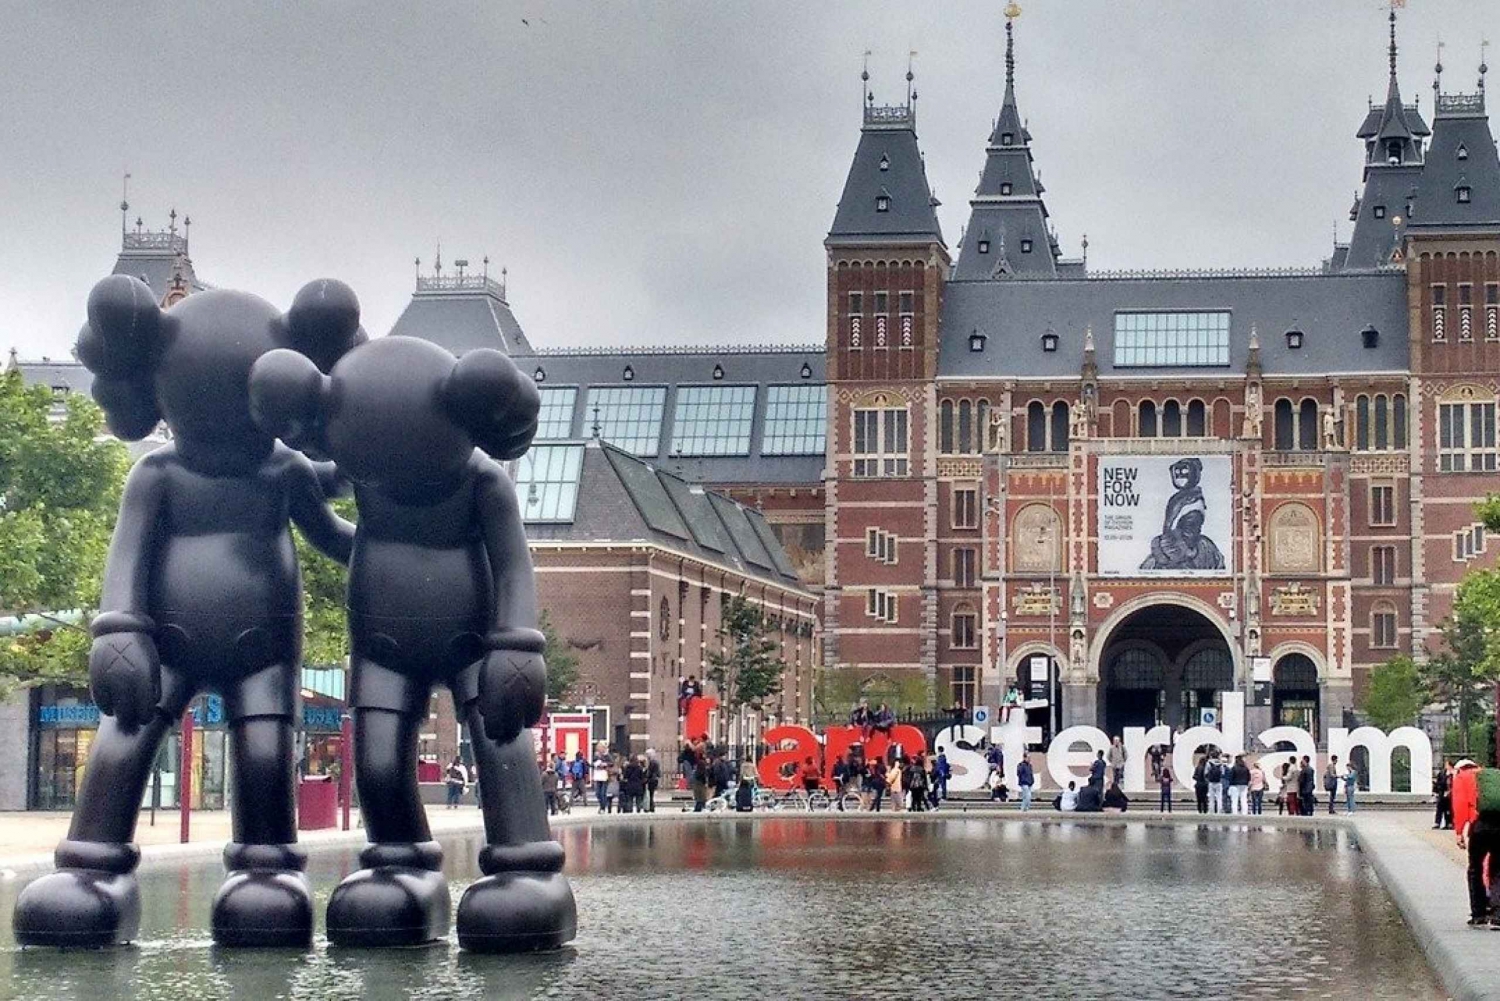 Amsterdam: National Monument and City Walking Tour